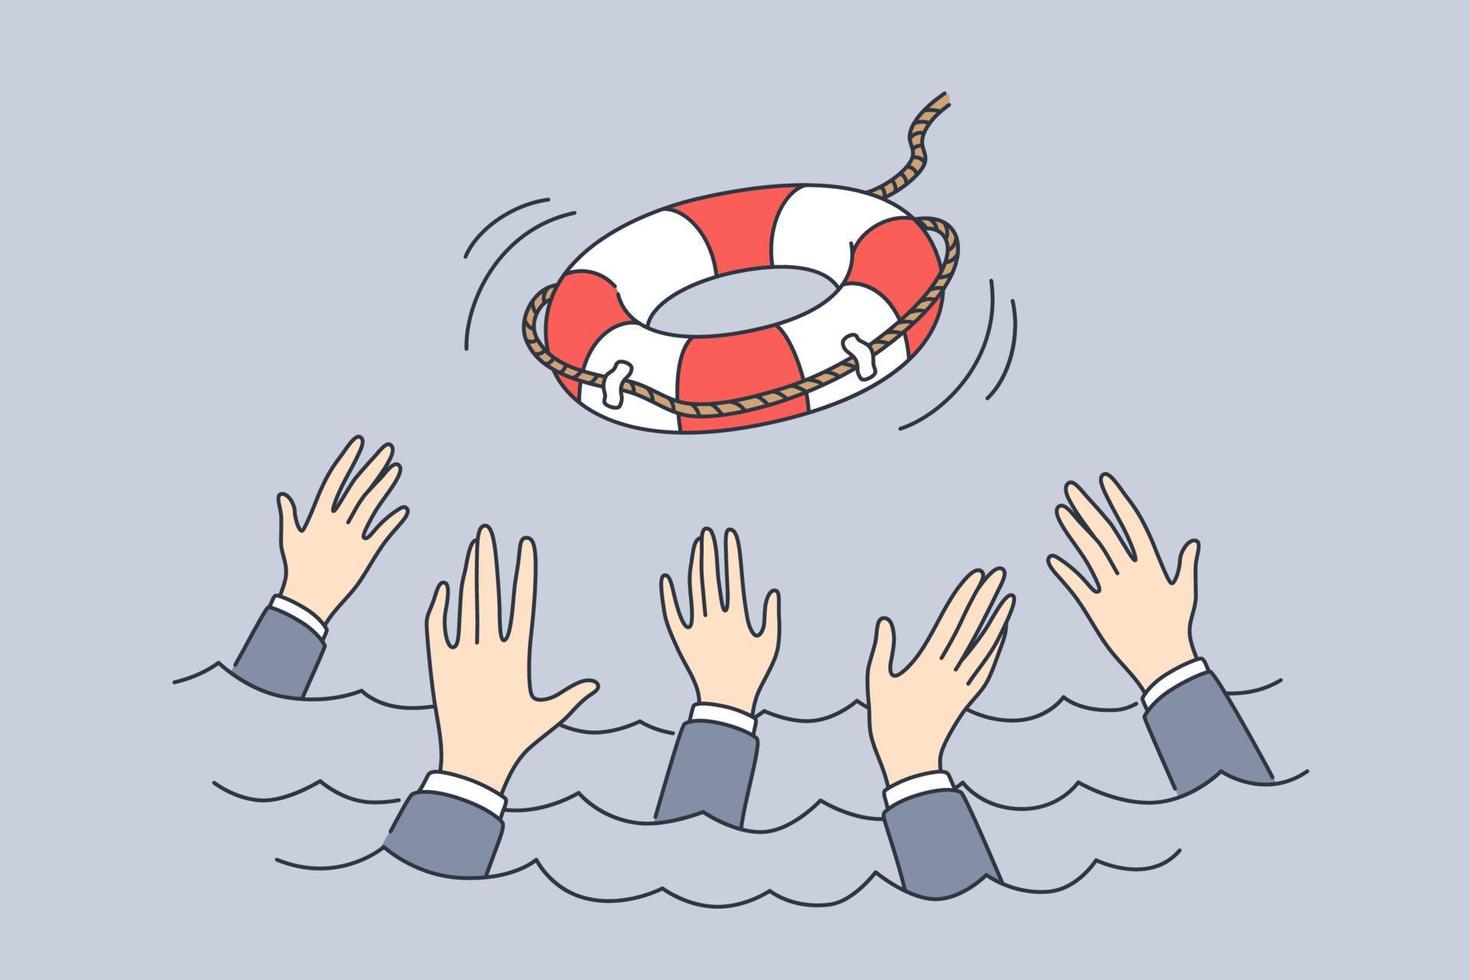 Support, bankrupt, crisis management concept. Hands of business people trying to catch lifebuoy from ship and get help support service in difficult situation vector illustration